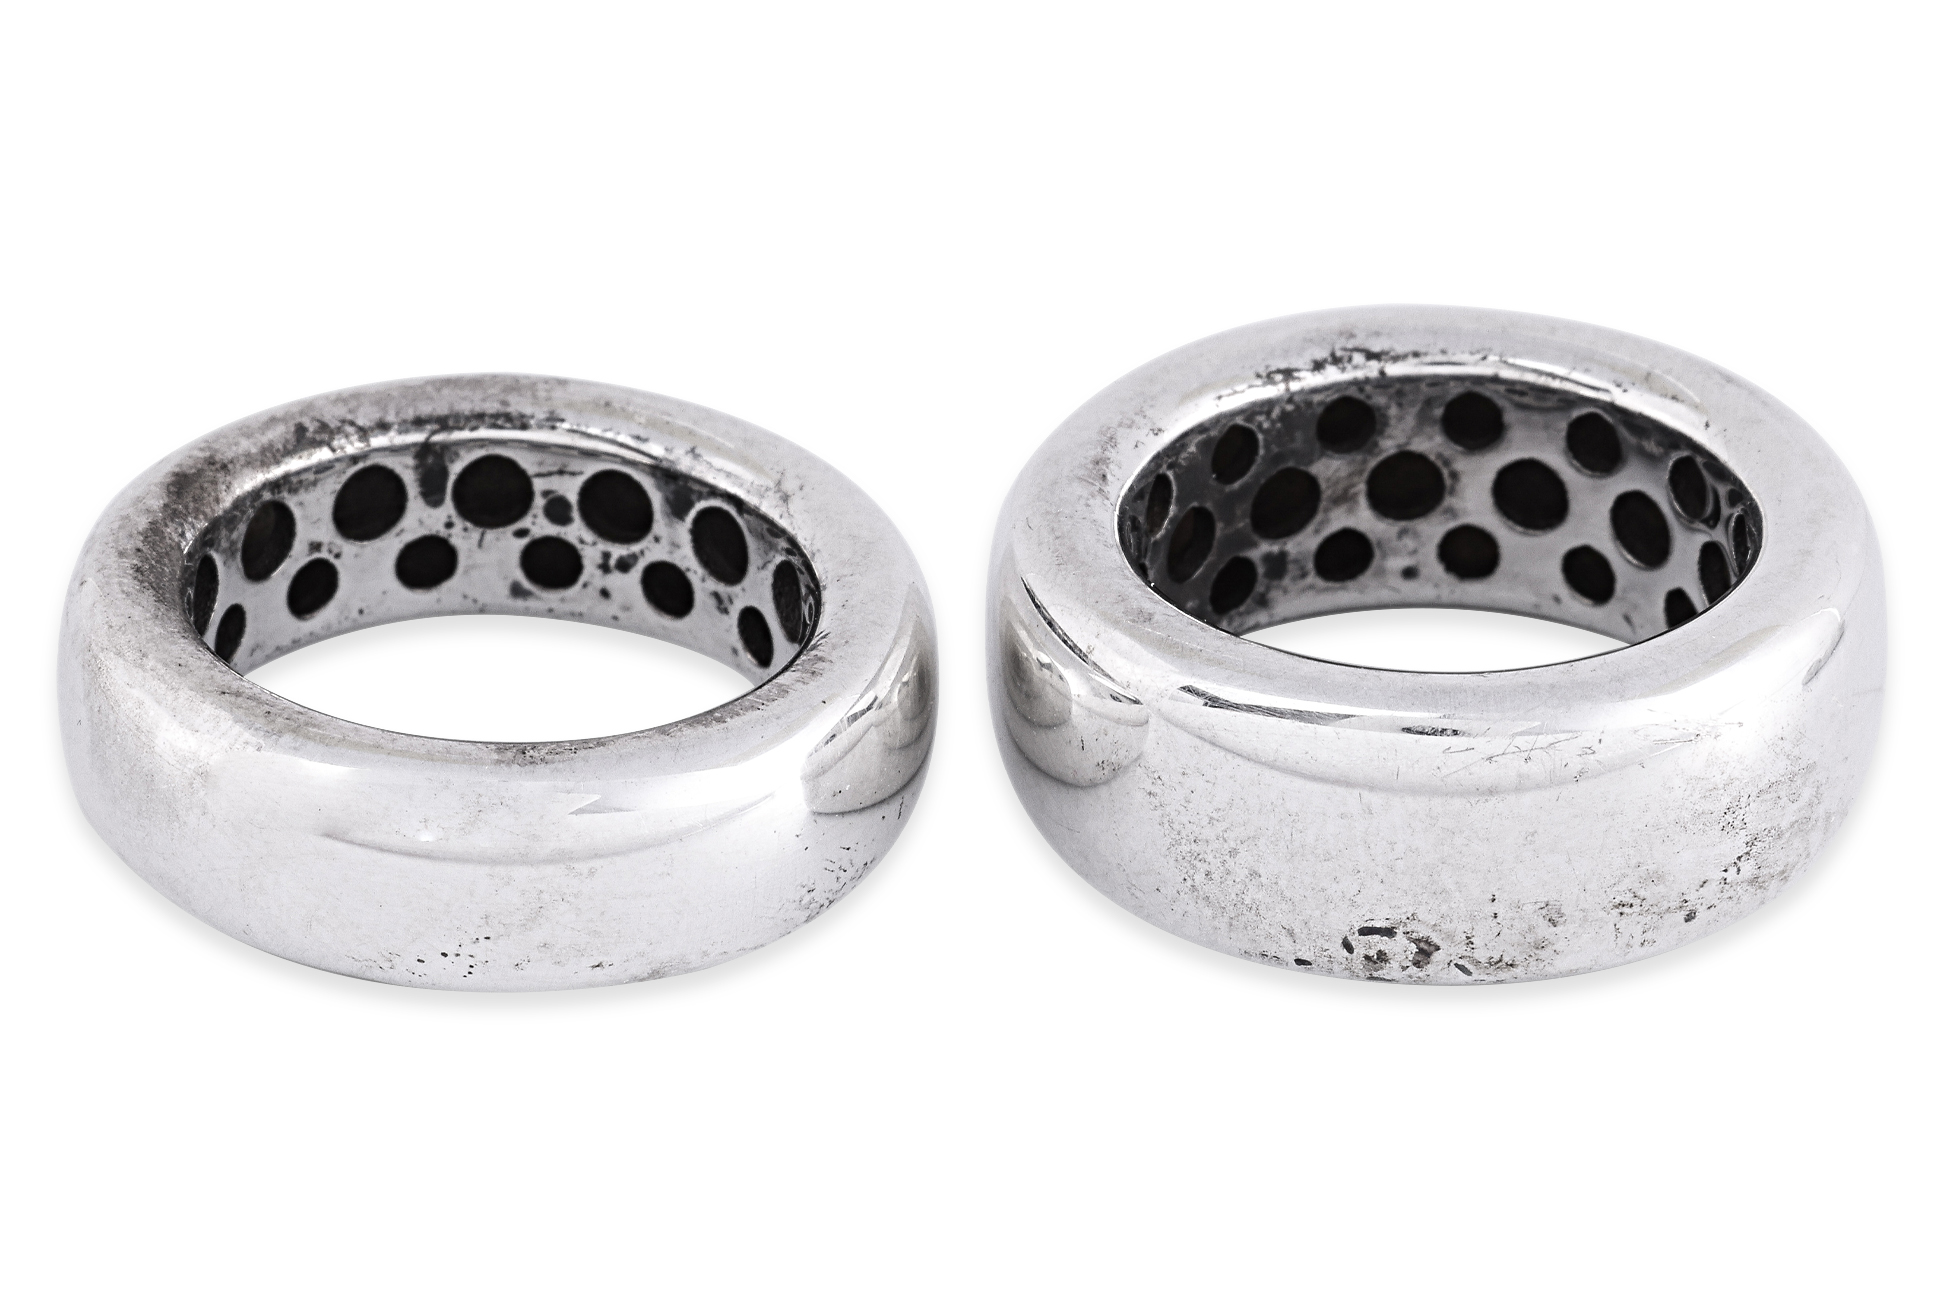 A PAIR OF POMELLATO SILVER 67 RINGS - Image 2 of 3